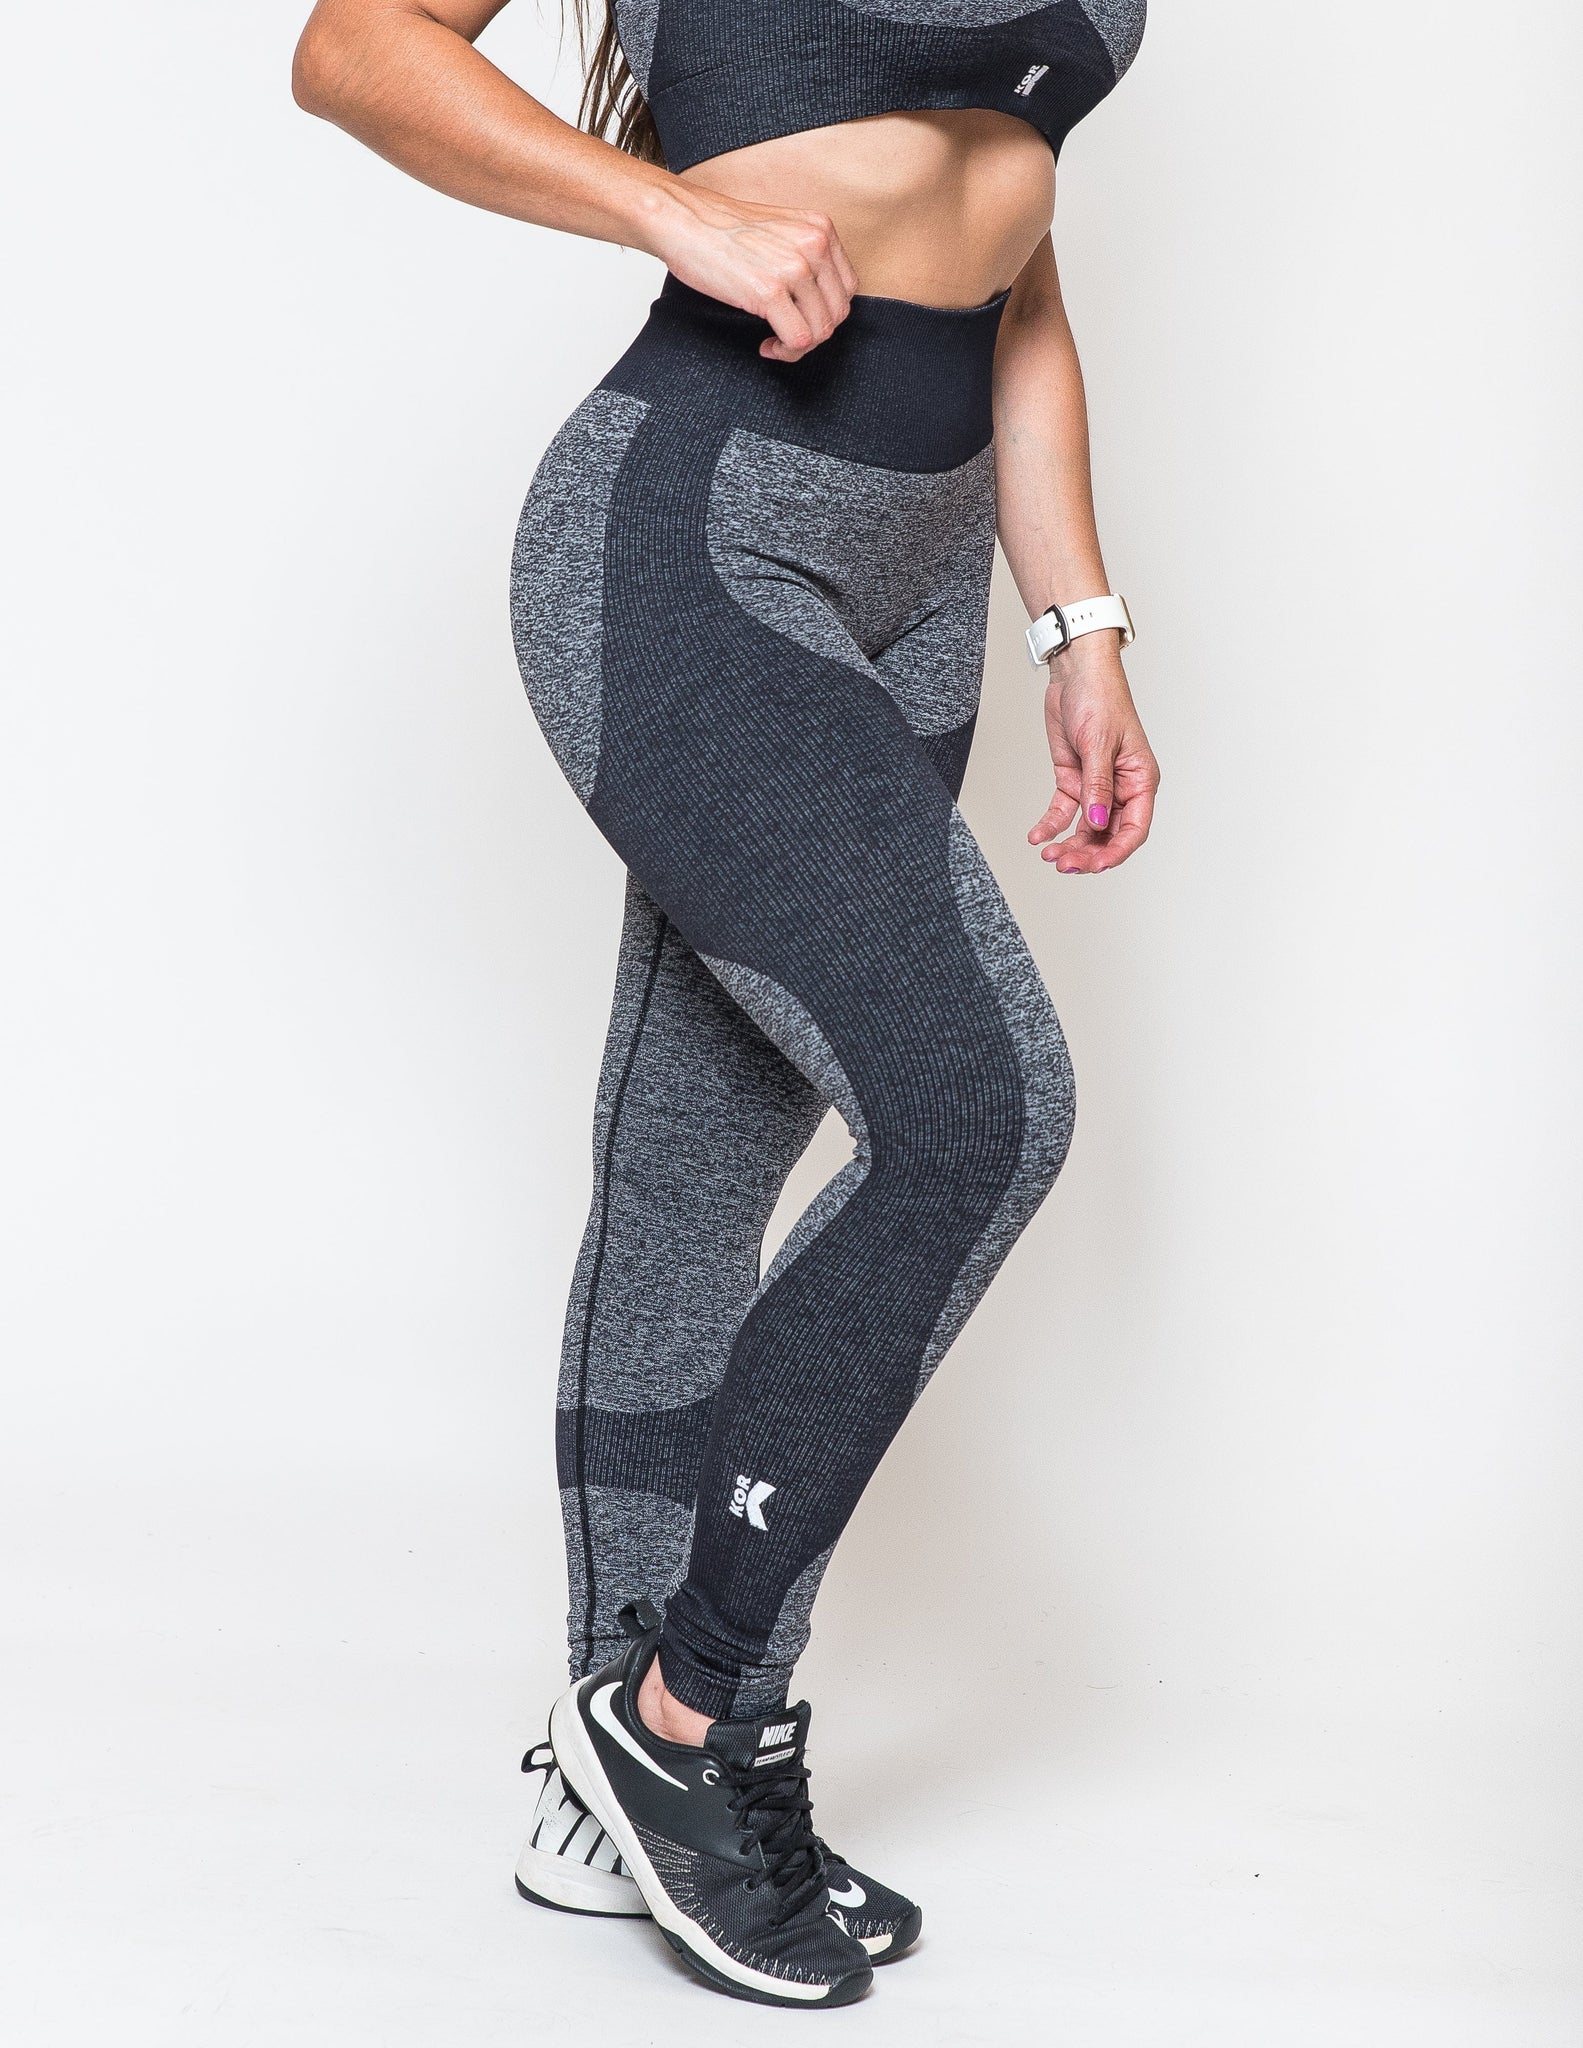 Gym Leggings Seamless Tummy Control Compression Leggings With Mesh Panel